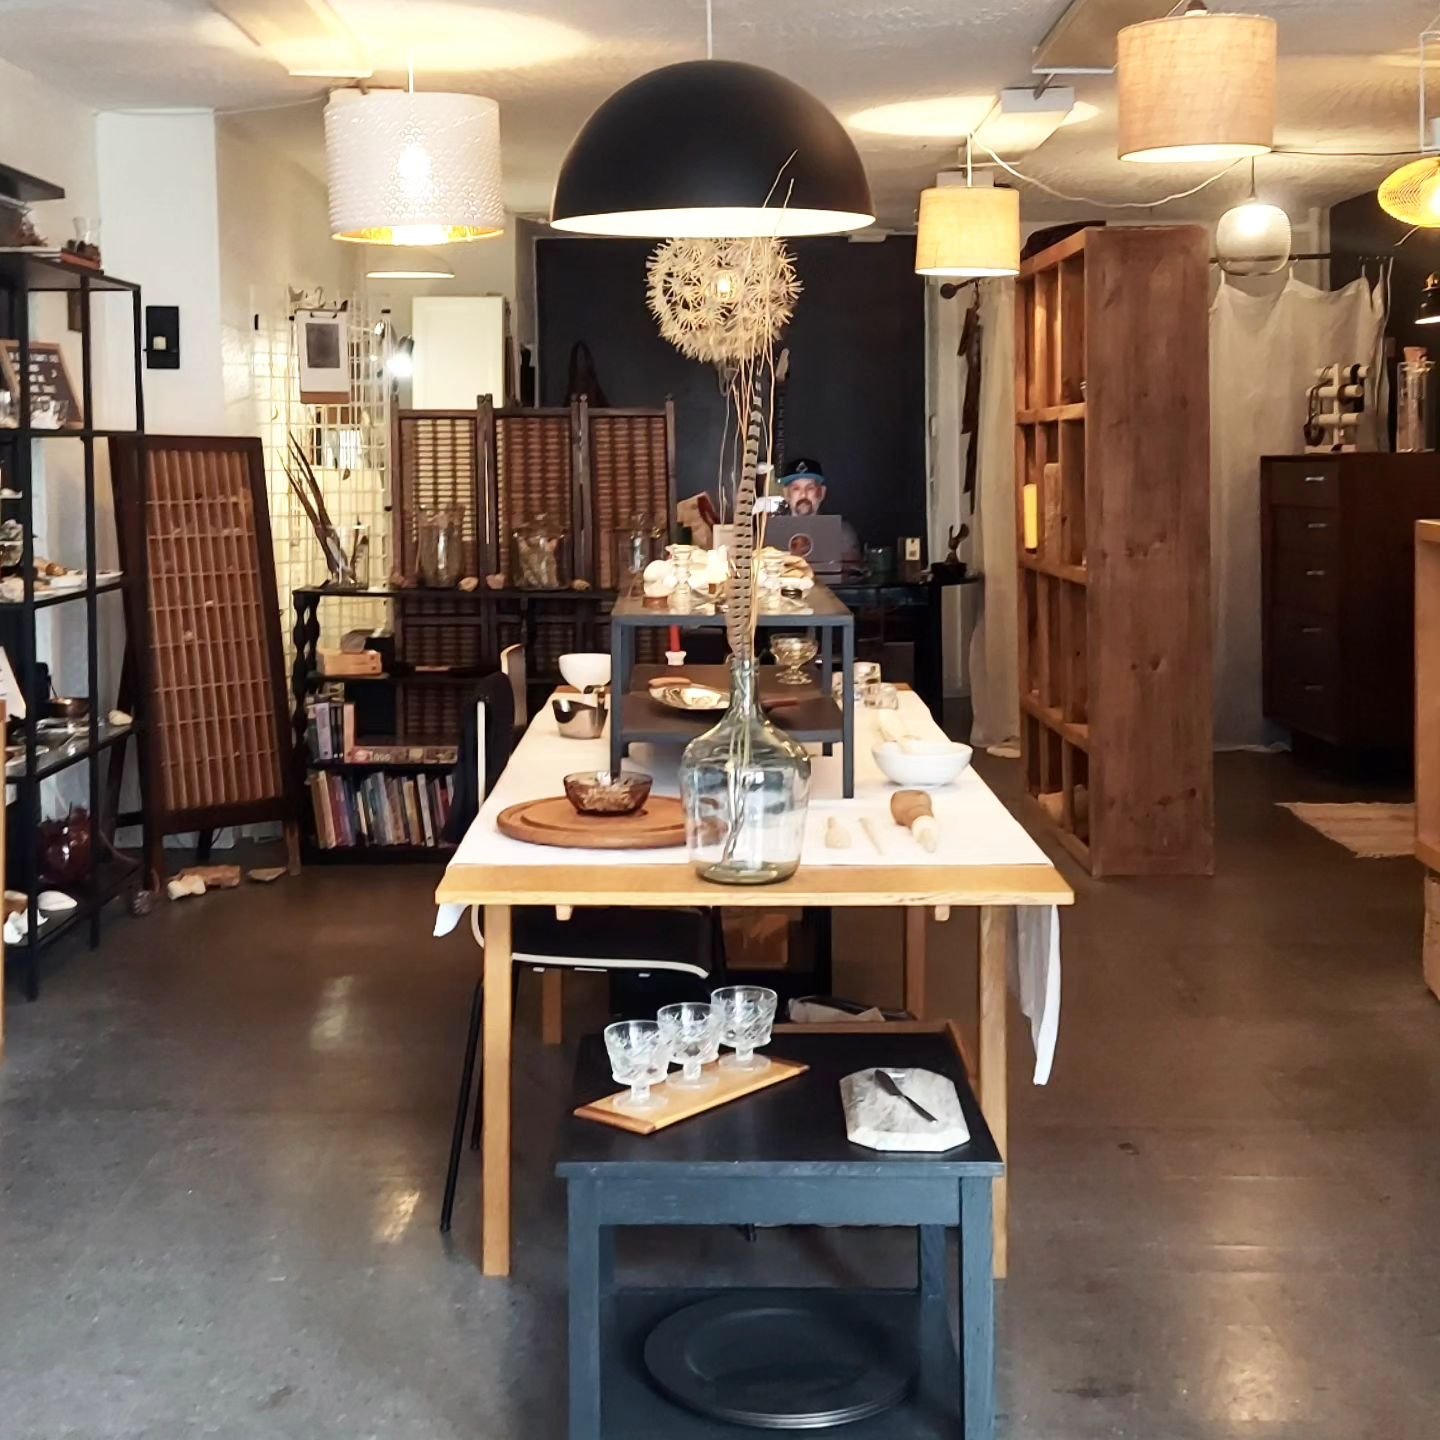 ✨️TODAY'S HOURS 12-5✨️

Where sustainability meets style and every purchase supports our community. Shop thrifted treasures and make a difference today!

&bull;&bull;&bull;

#SpeakeasyMpls #speakeasy #CuratedCollections #HandpickedWithLove #thrifting